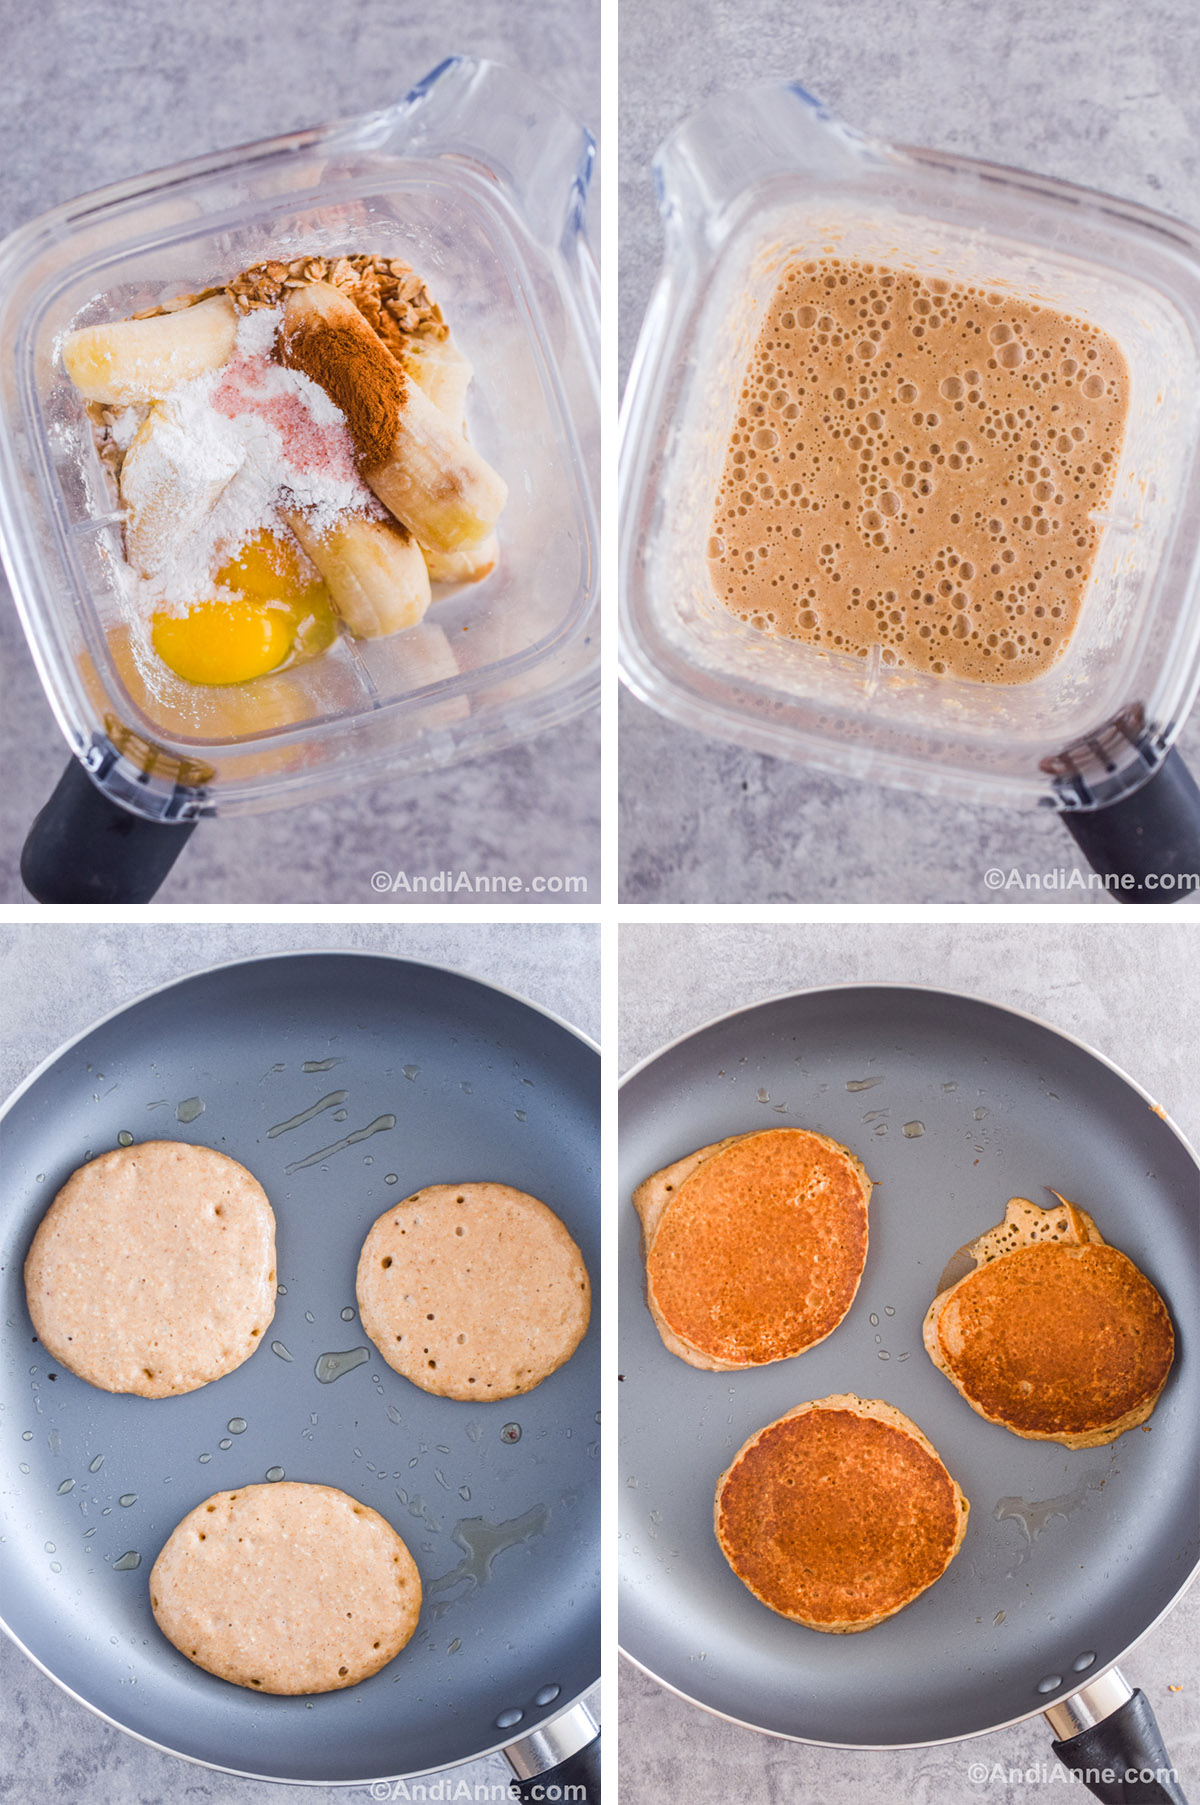 Four images showing steps to make the recipe. First is a blender cup with ingredients dumped in. Second is blender cup with pancake batter. Third is three pancakes cooking in the frying pan. Fourth is cooked pancakes in the frying pan. 